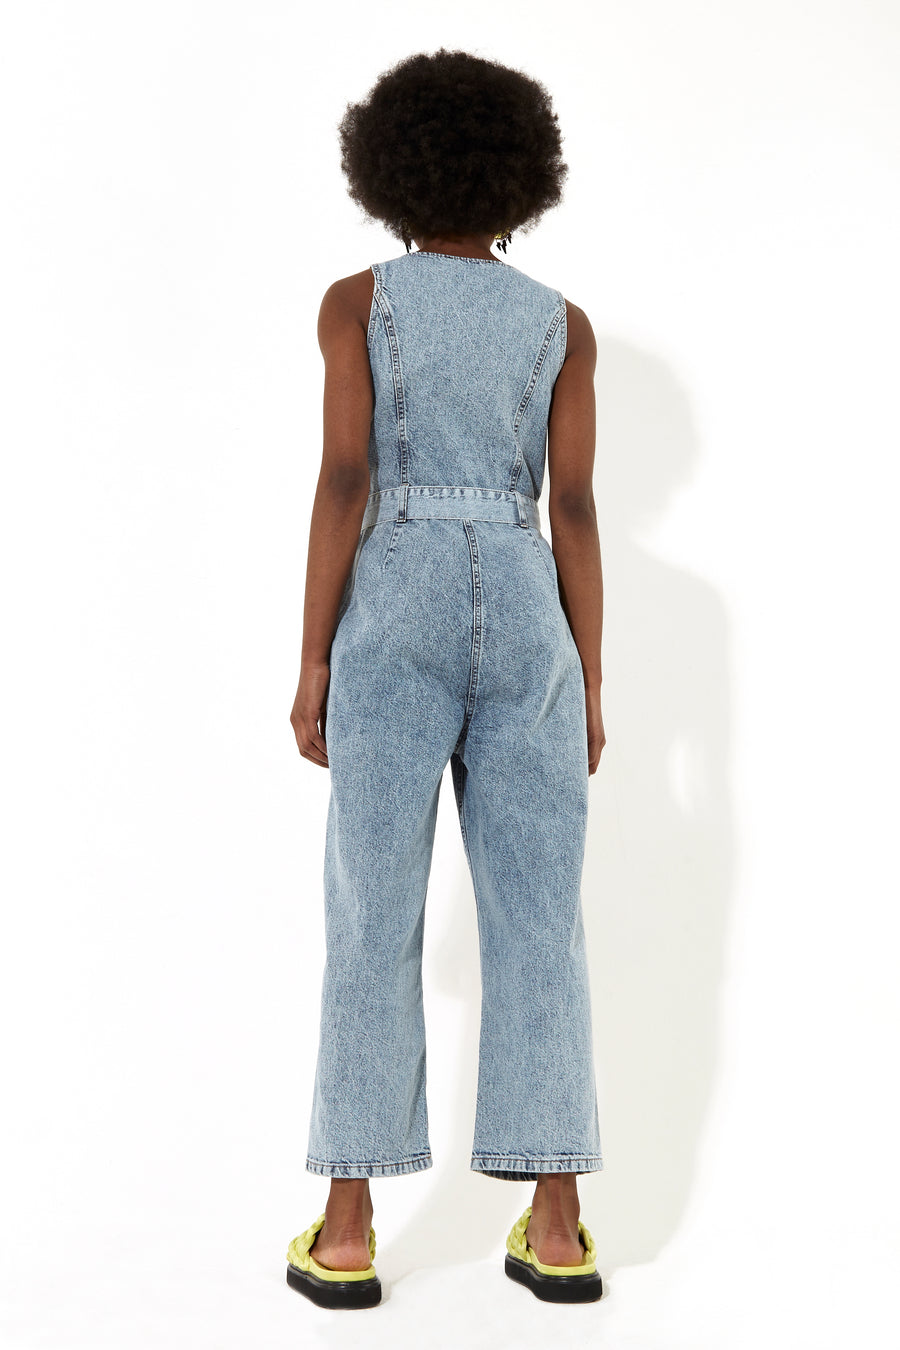 House of Holland blue 90’s look denim jumpsuit with a belt and tortoise shell buttons